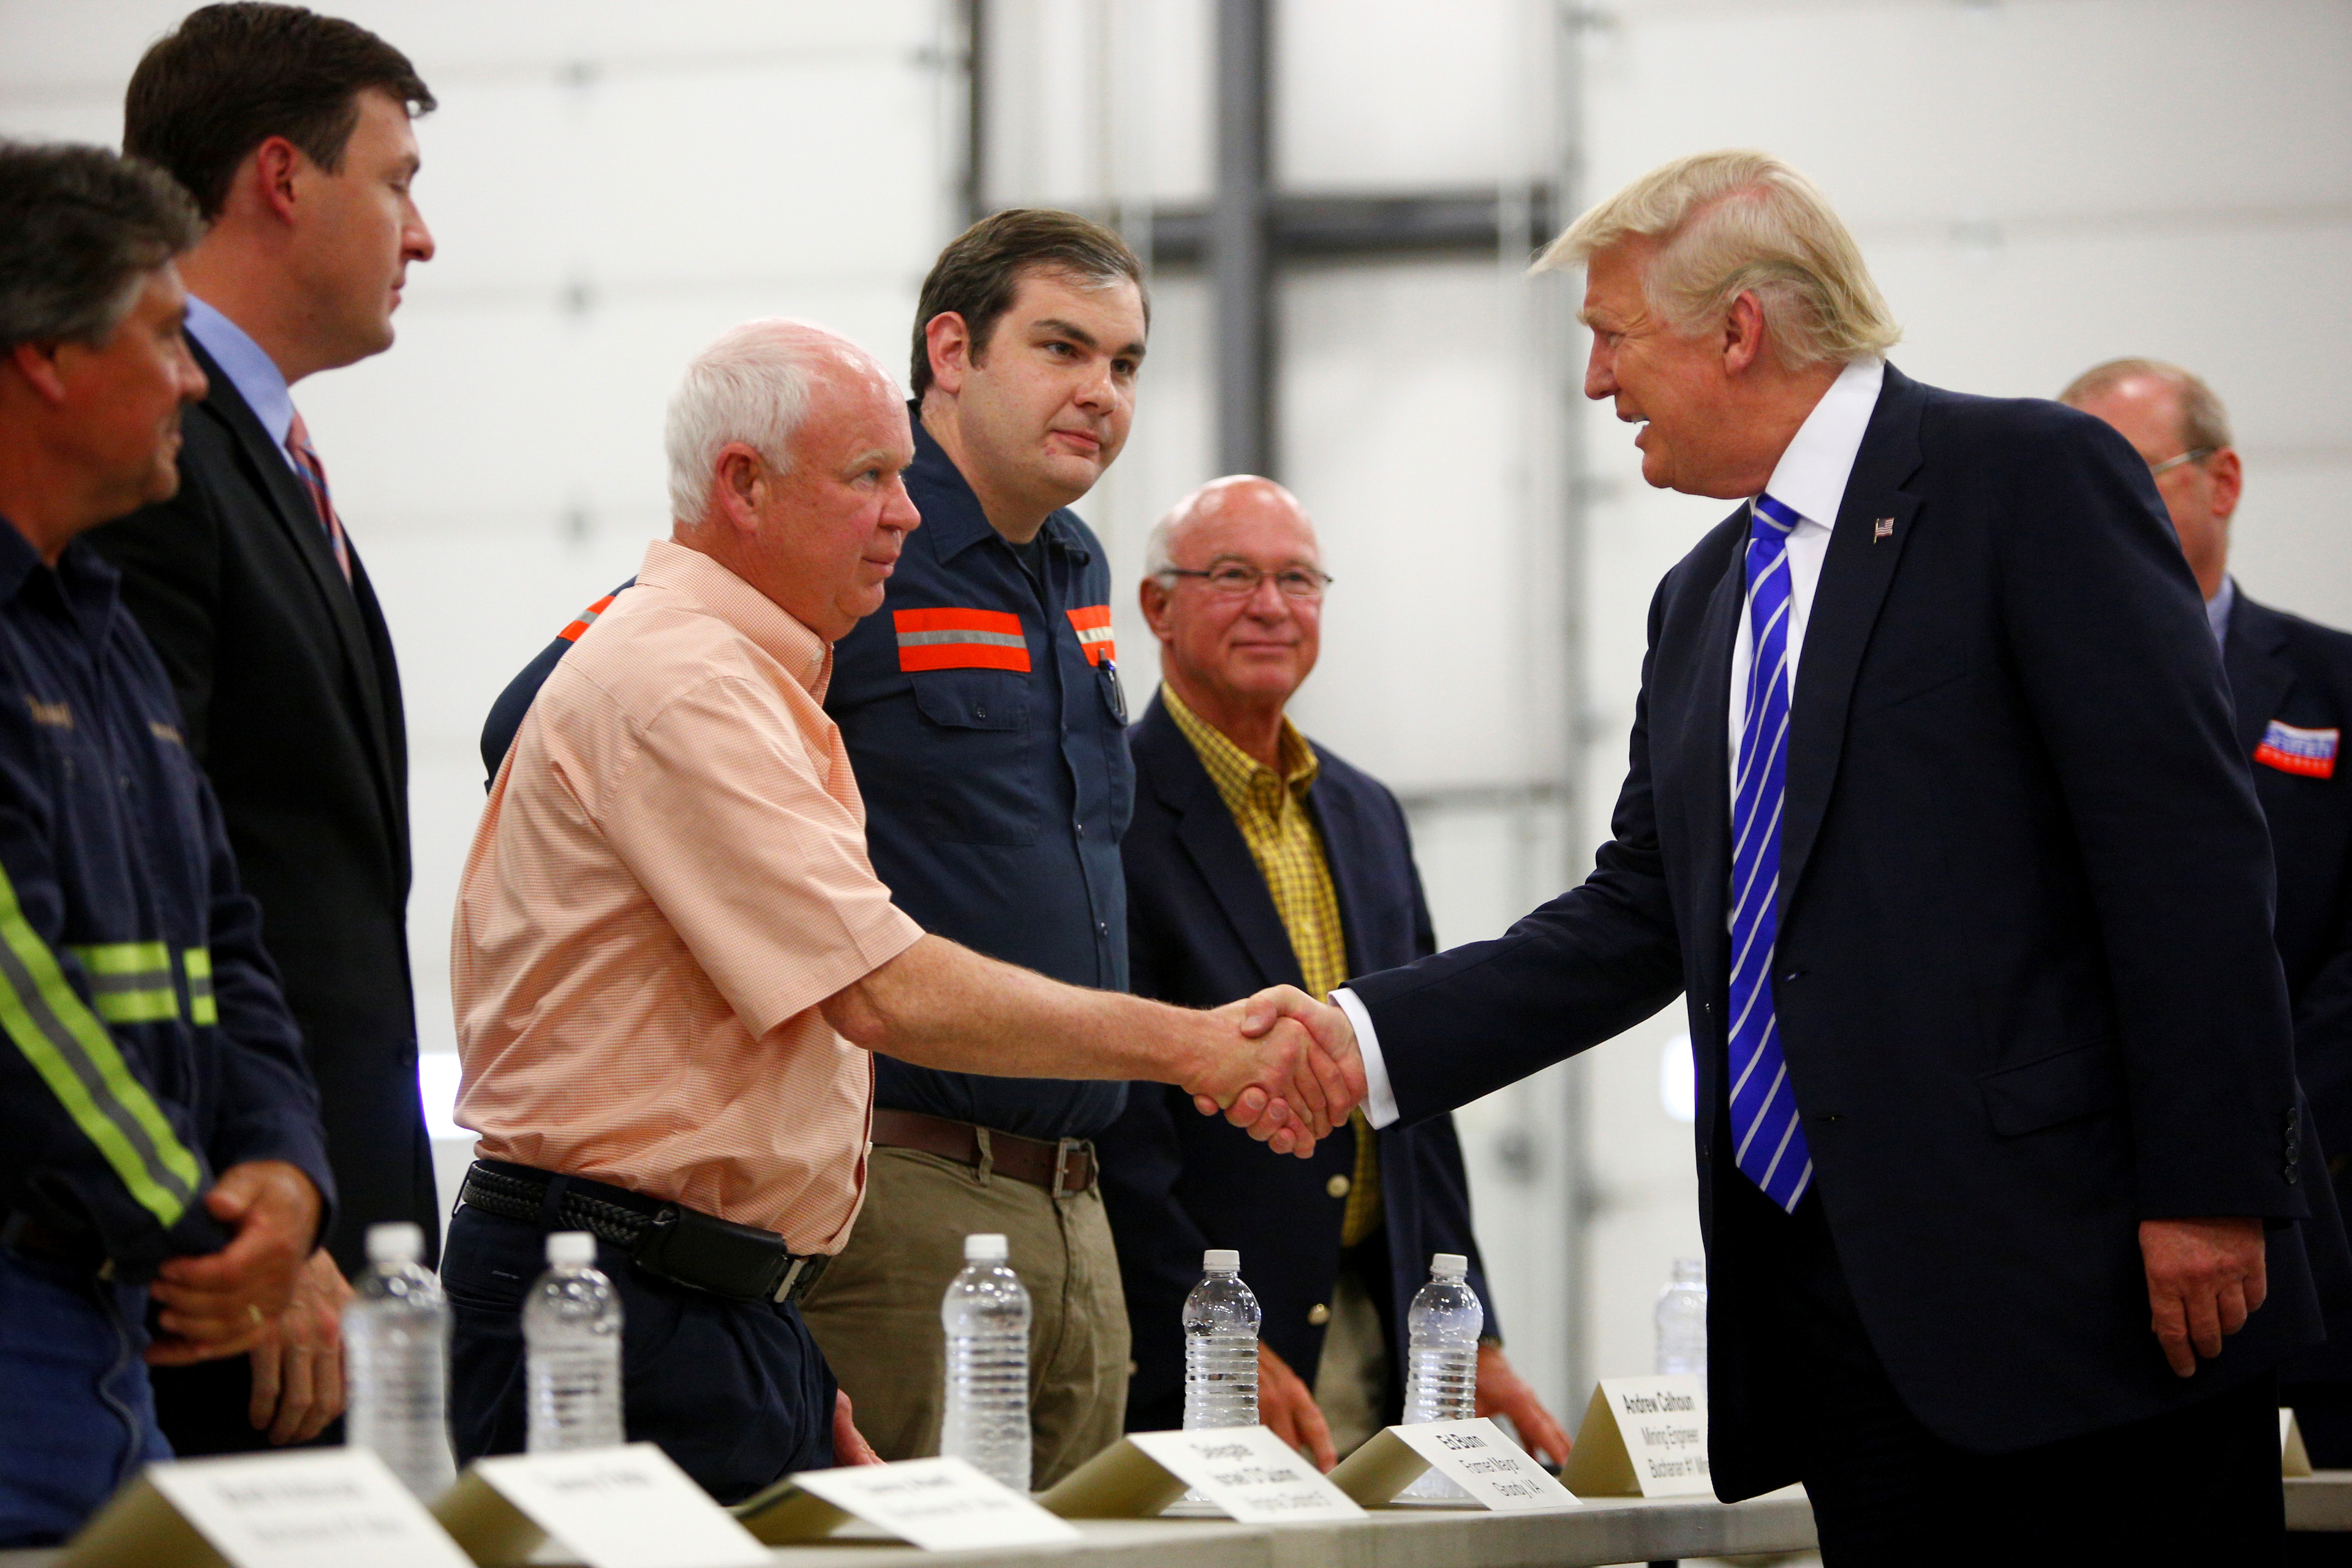 Republican U.S. presidential nominee Donald Trump attends a coal mining round table discussion at Fitzgerald Peterbilt in Glade Spring, Virginia